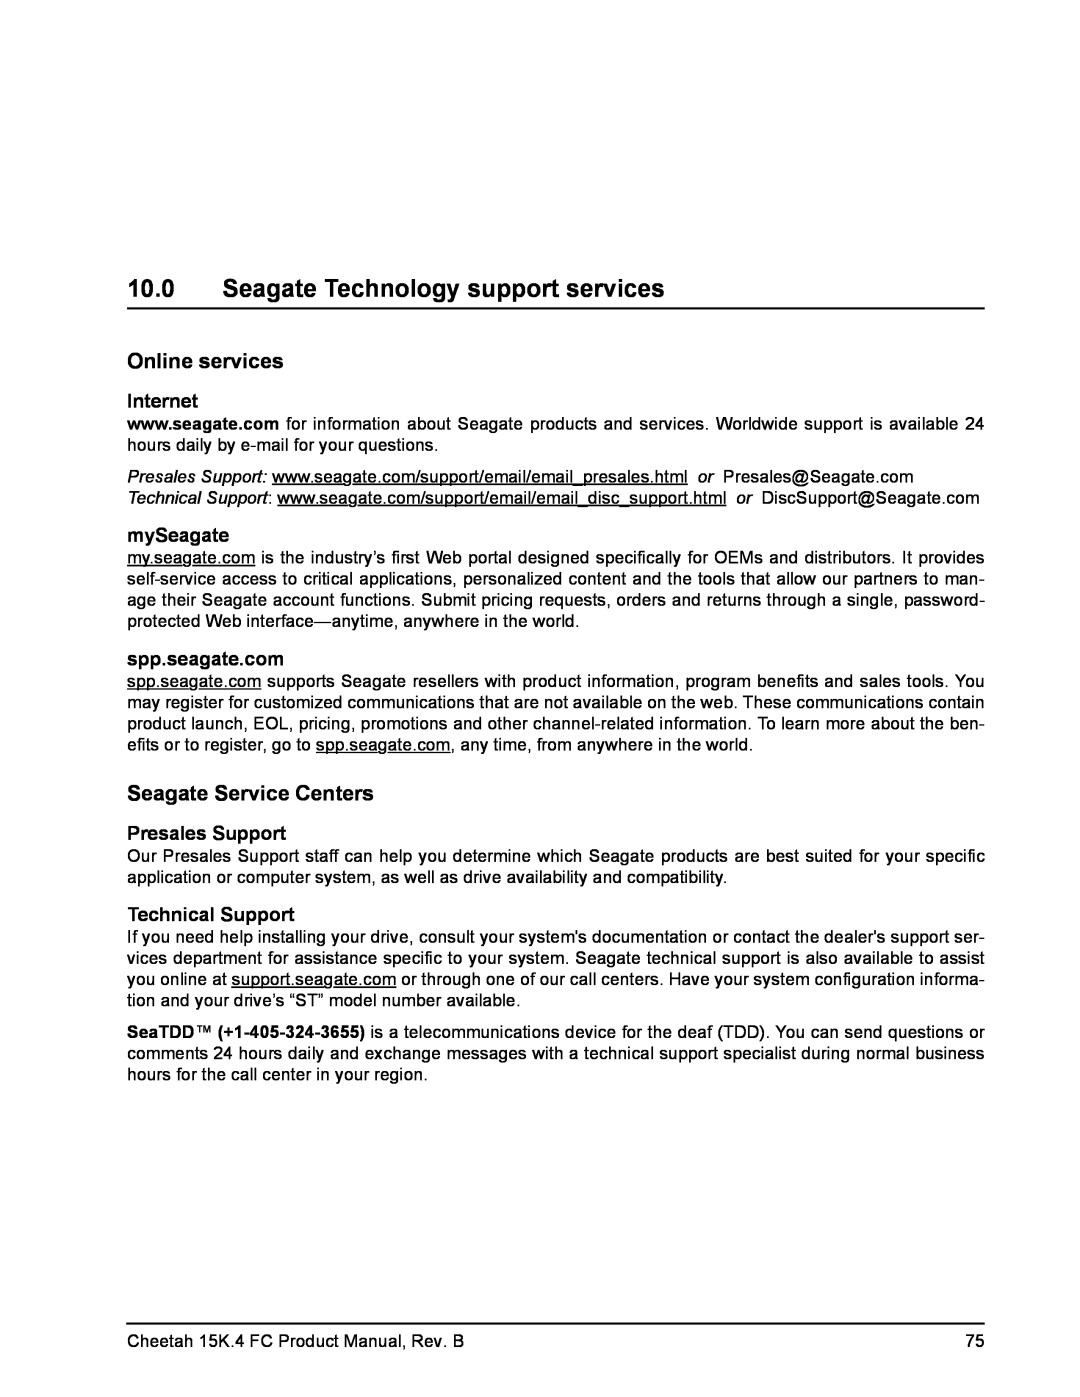 Seagate ST3146954FC Seagate Technology support services, Online services, Seagate Service Centers, Internet, mySeagate 